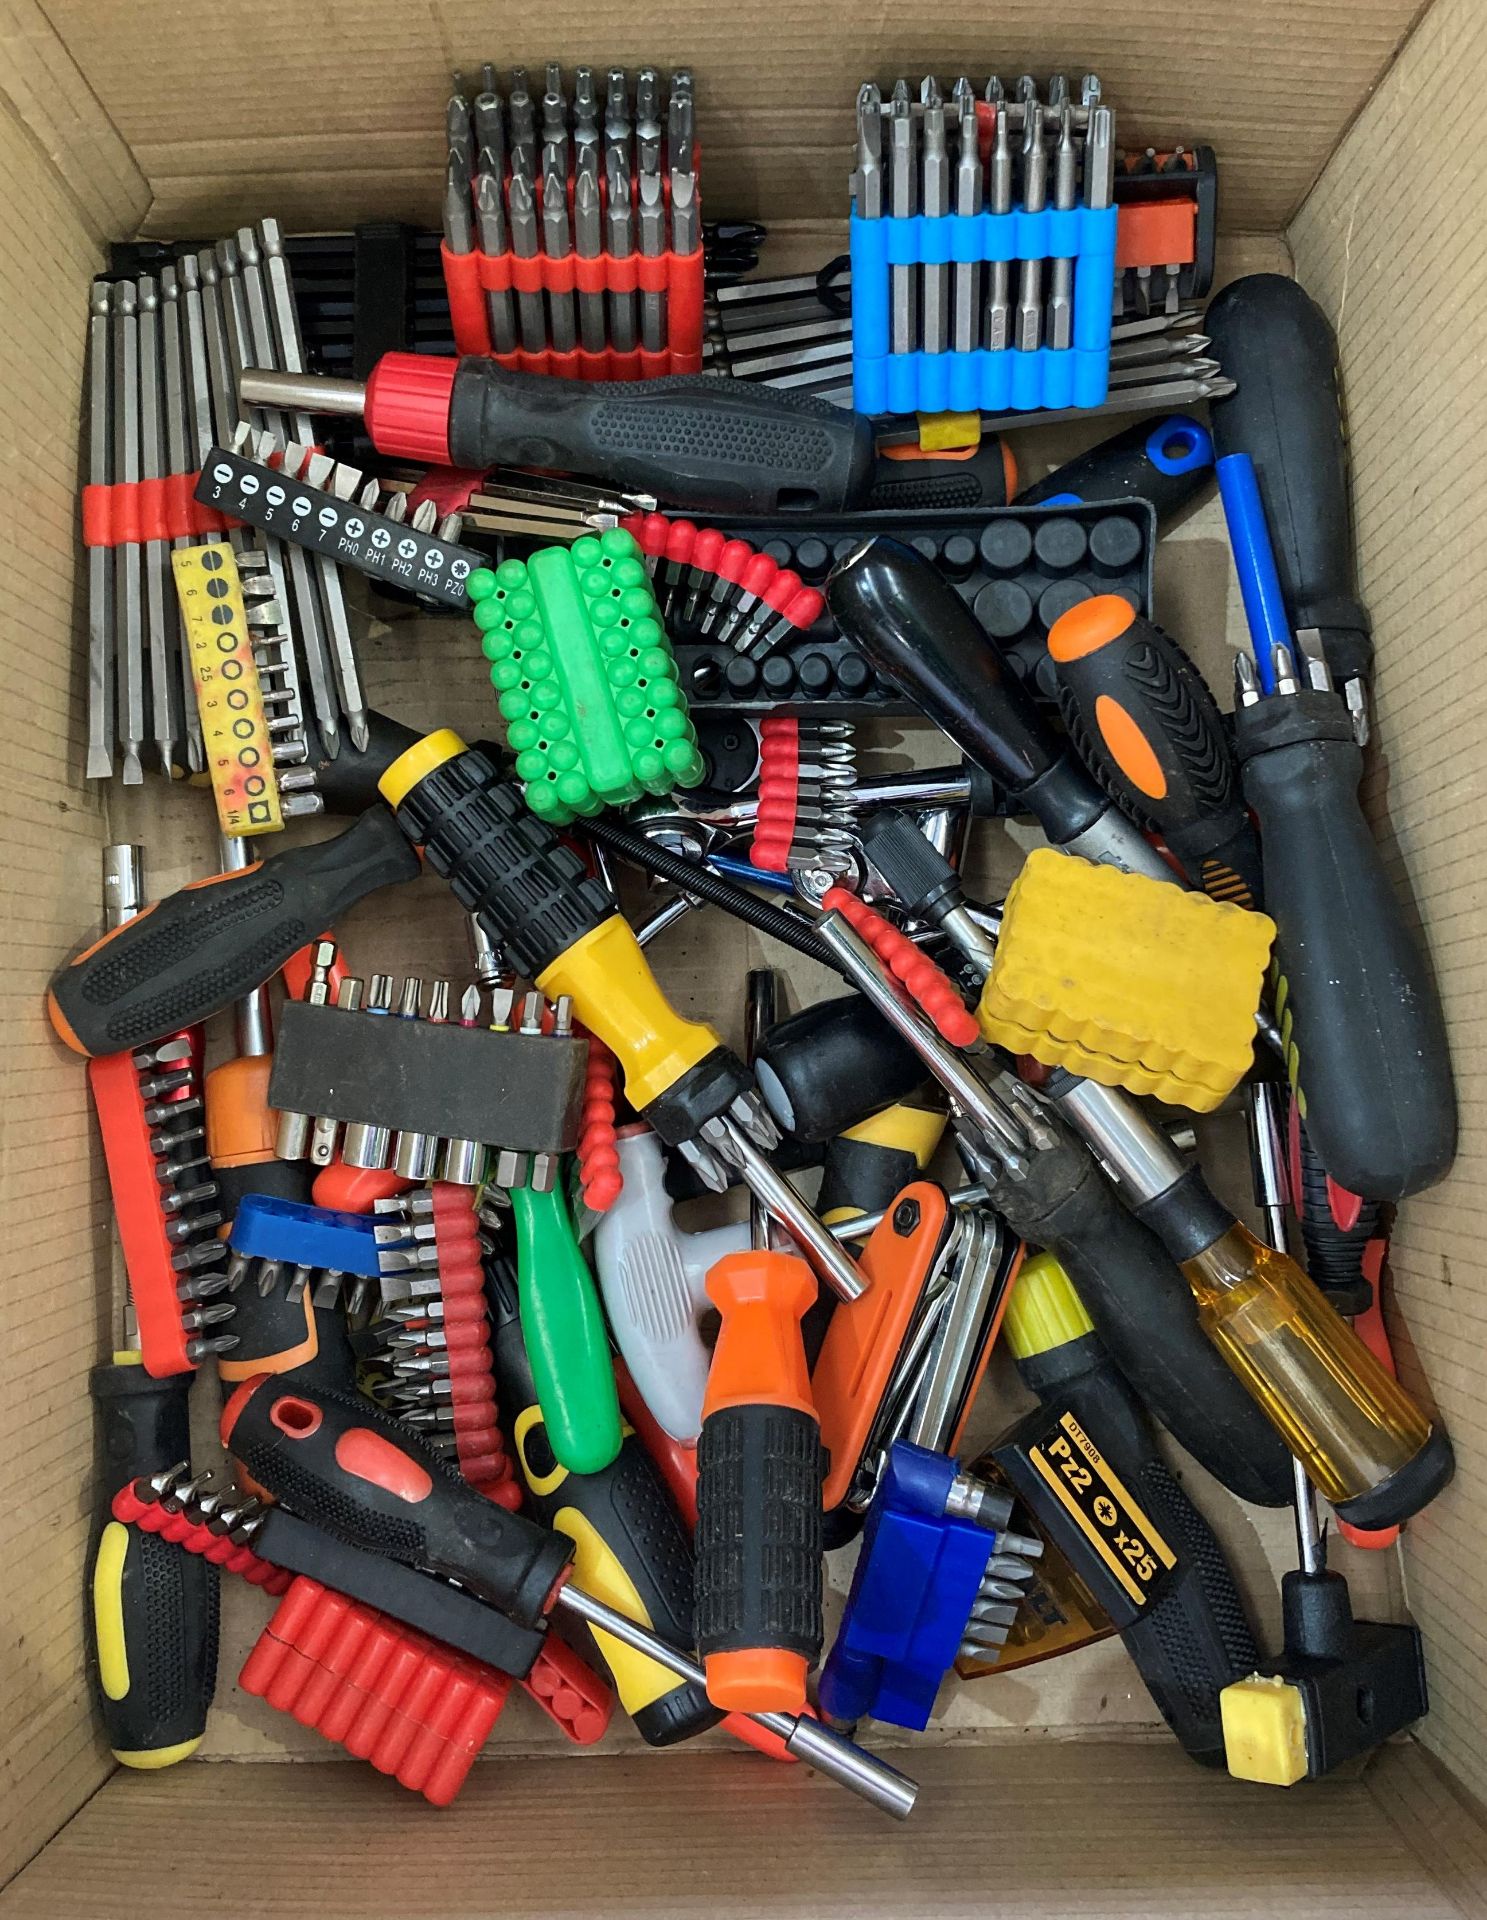 Contents to box - forty assorted interchangeable screwdrivers, ratchet screw drivers,